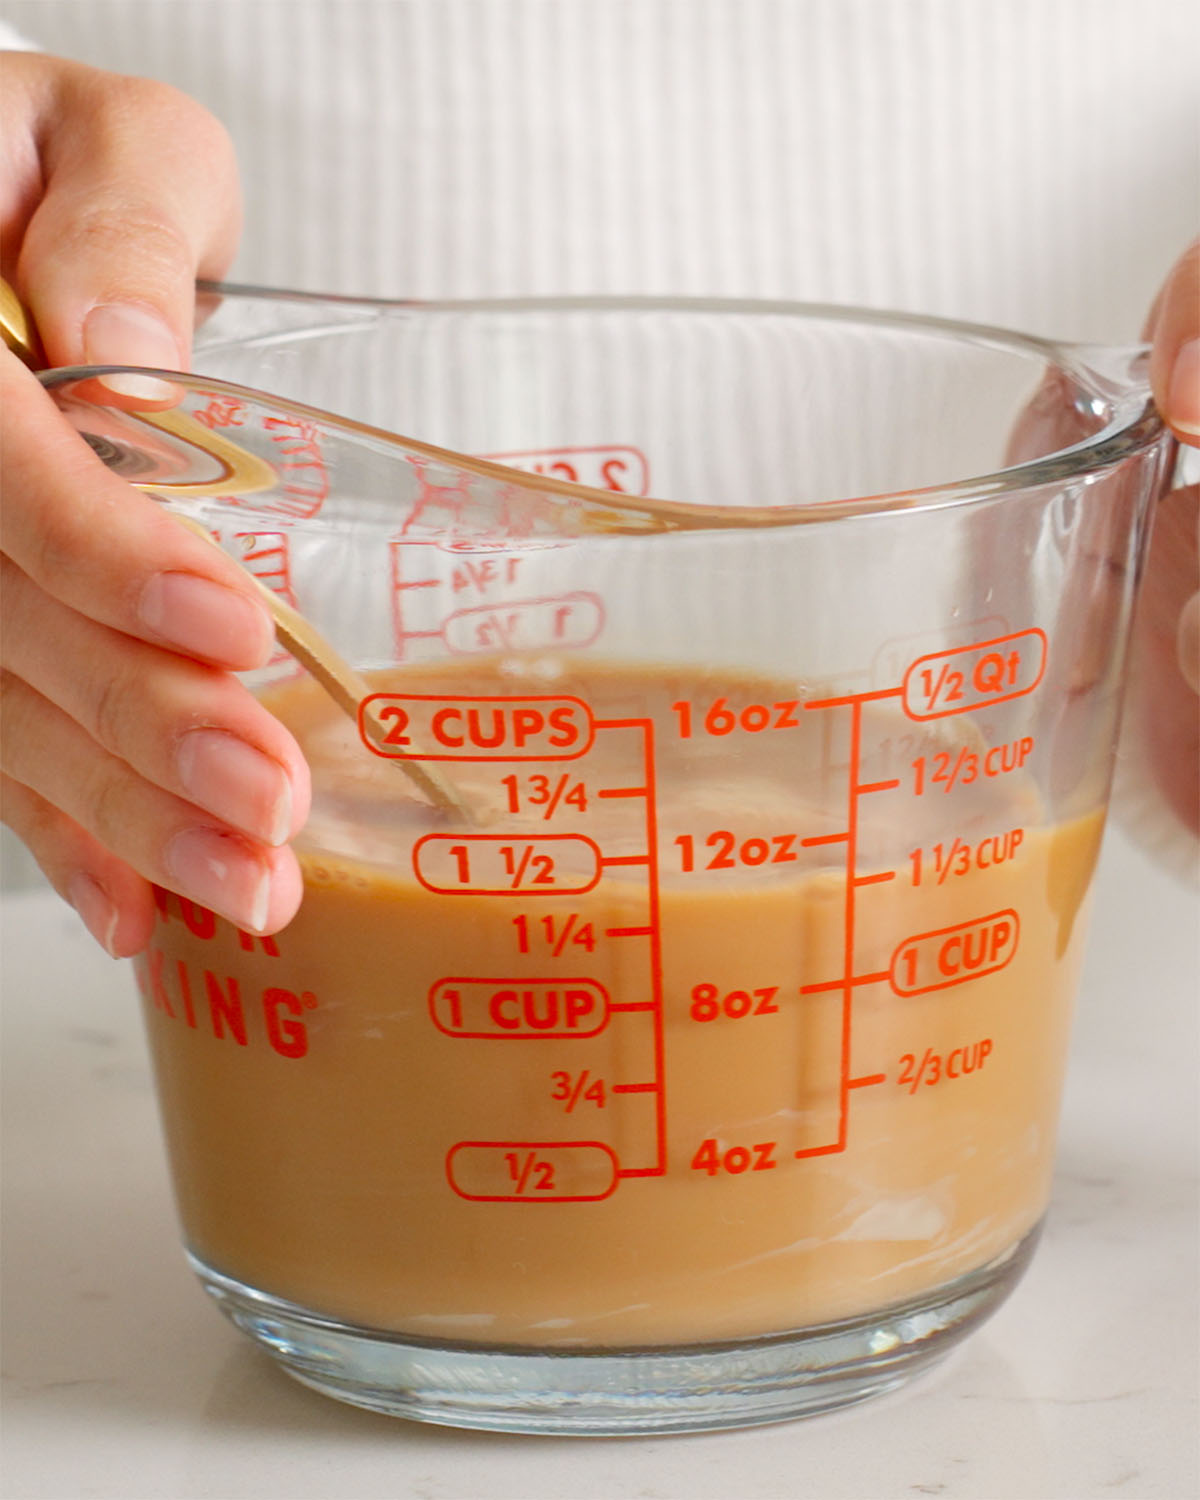 A measuring cup full of Vietnamese coffee.